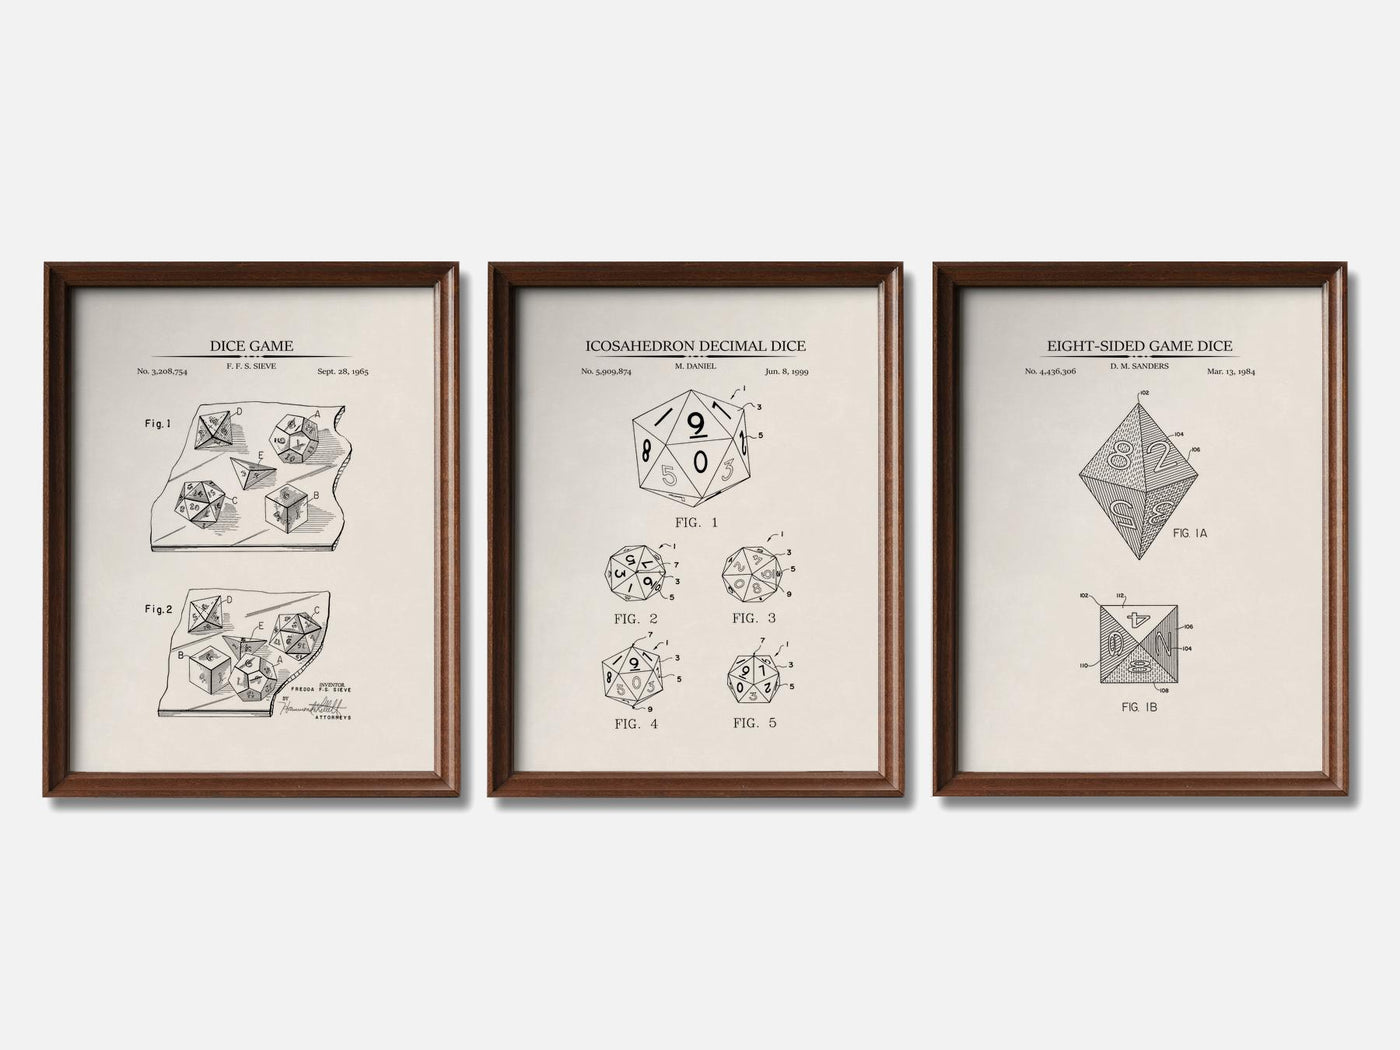 D&D Patent Print Set of 3 mockup - A_t10023-V1-PC_F+WA-SS_3-PS_11x14-C_ivo variant